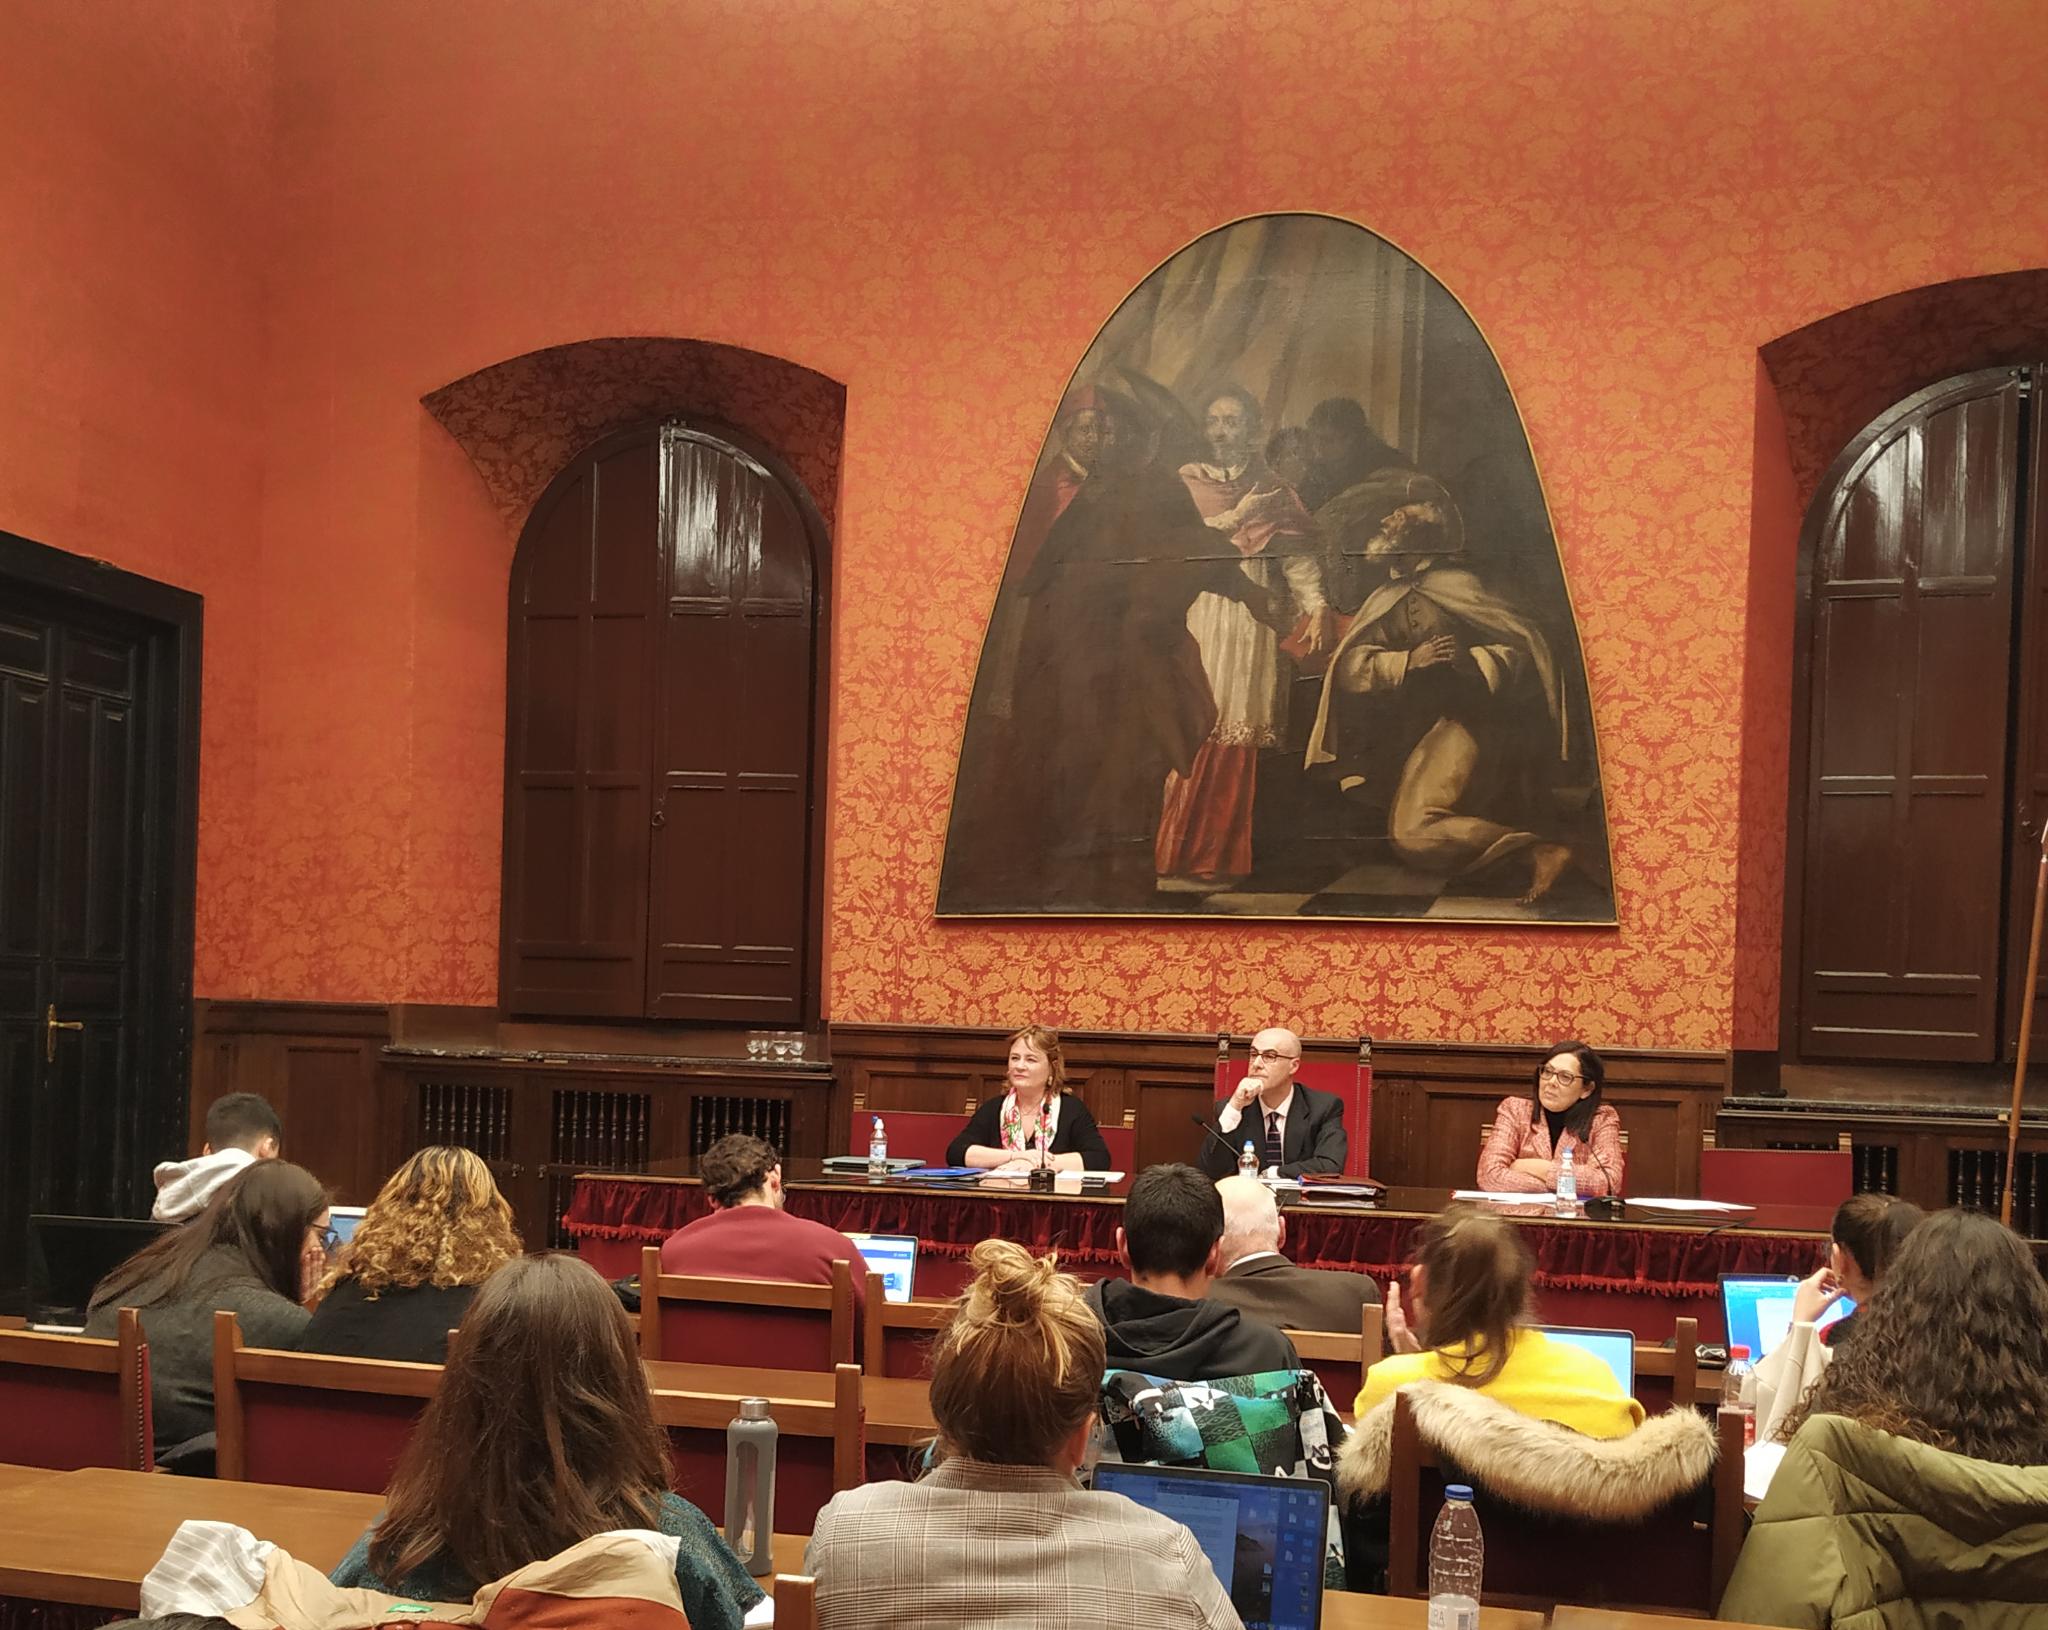 Image taken from the middle of the room where you can see the intervention of professors García Mahamut and Ridaura Martínez